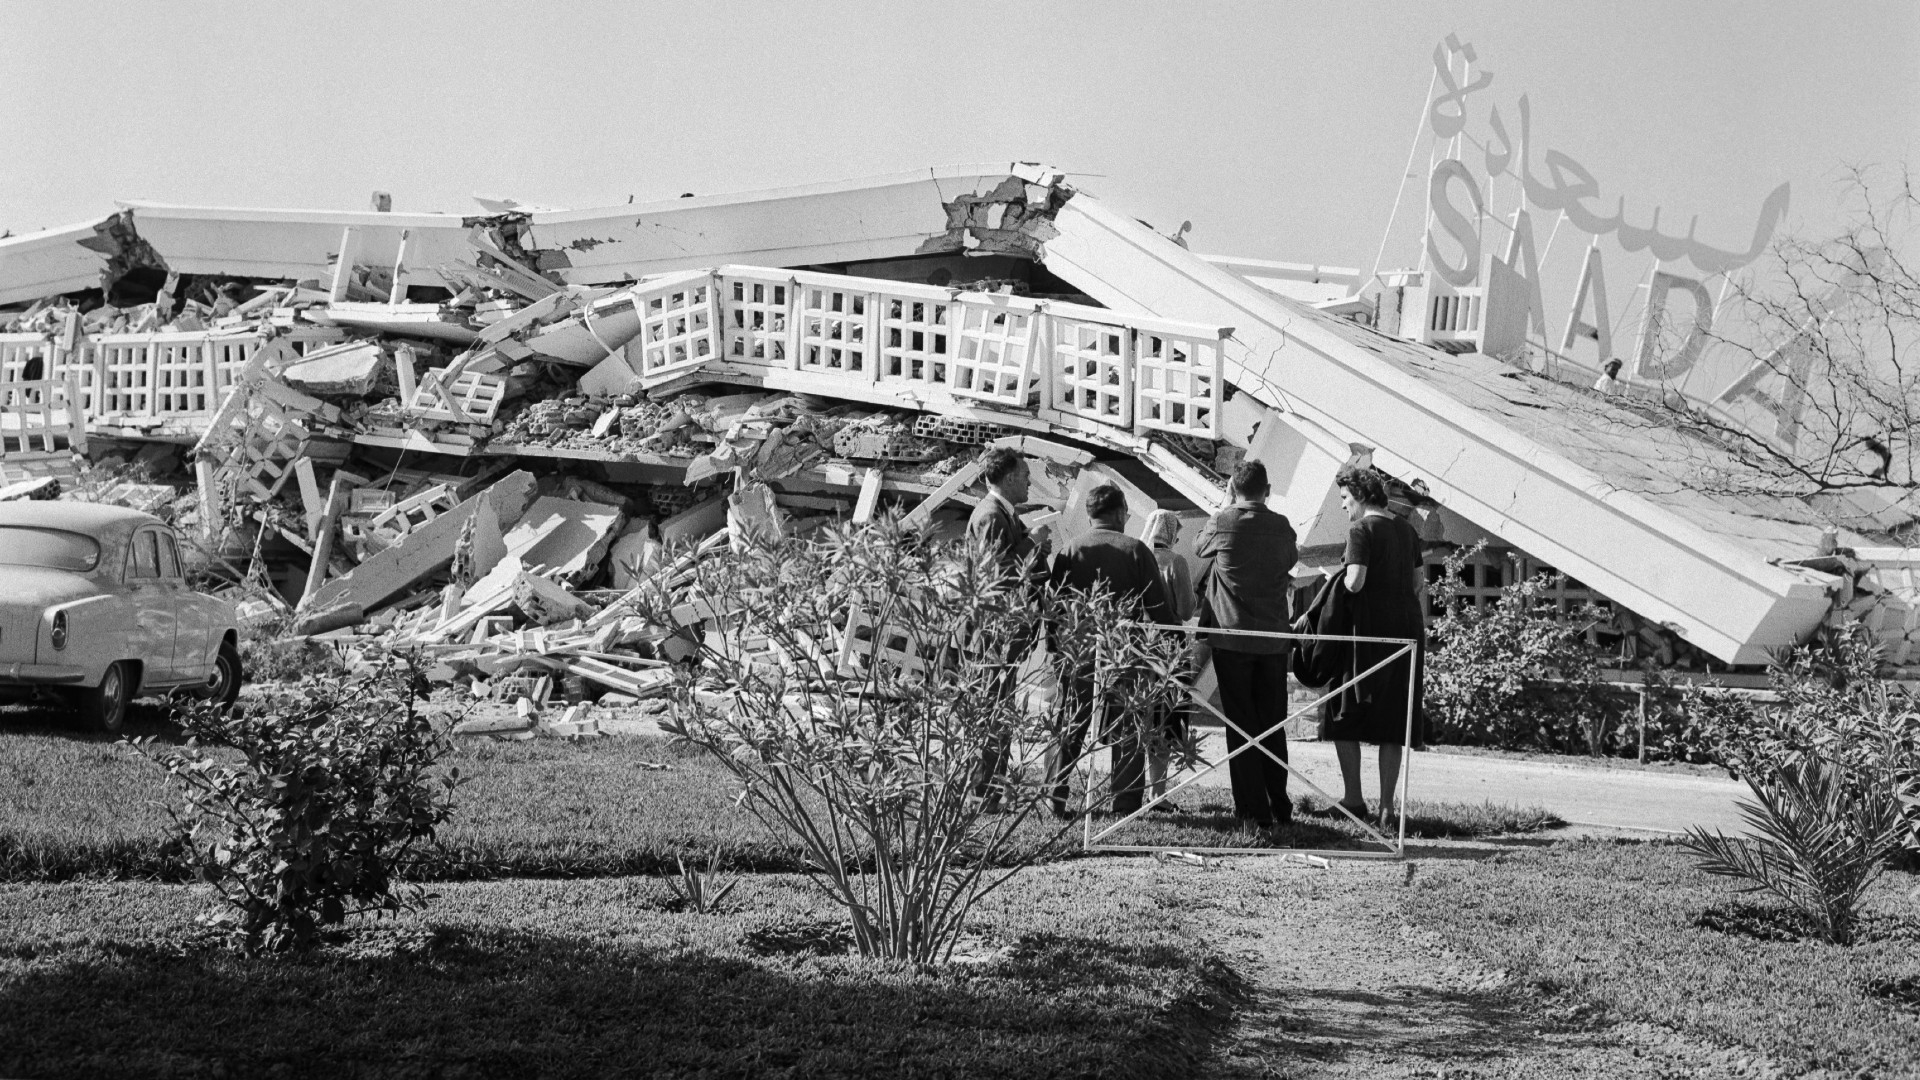 The rubble of the Saada hotel on 2 March 1960 after it was hit by a violent earthquake that struck the city of Agadir, Morocco